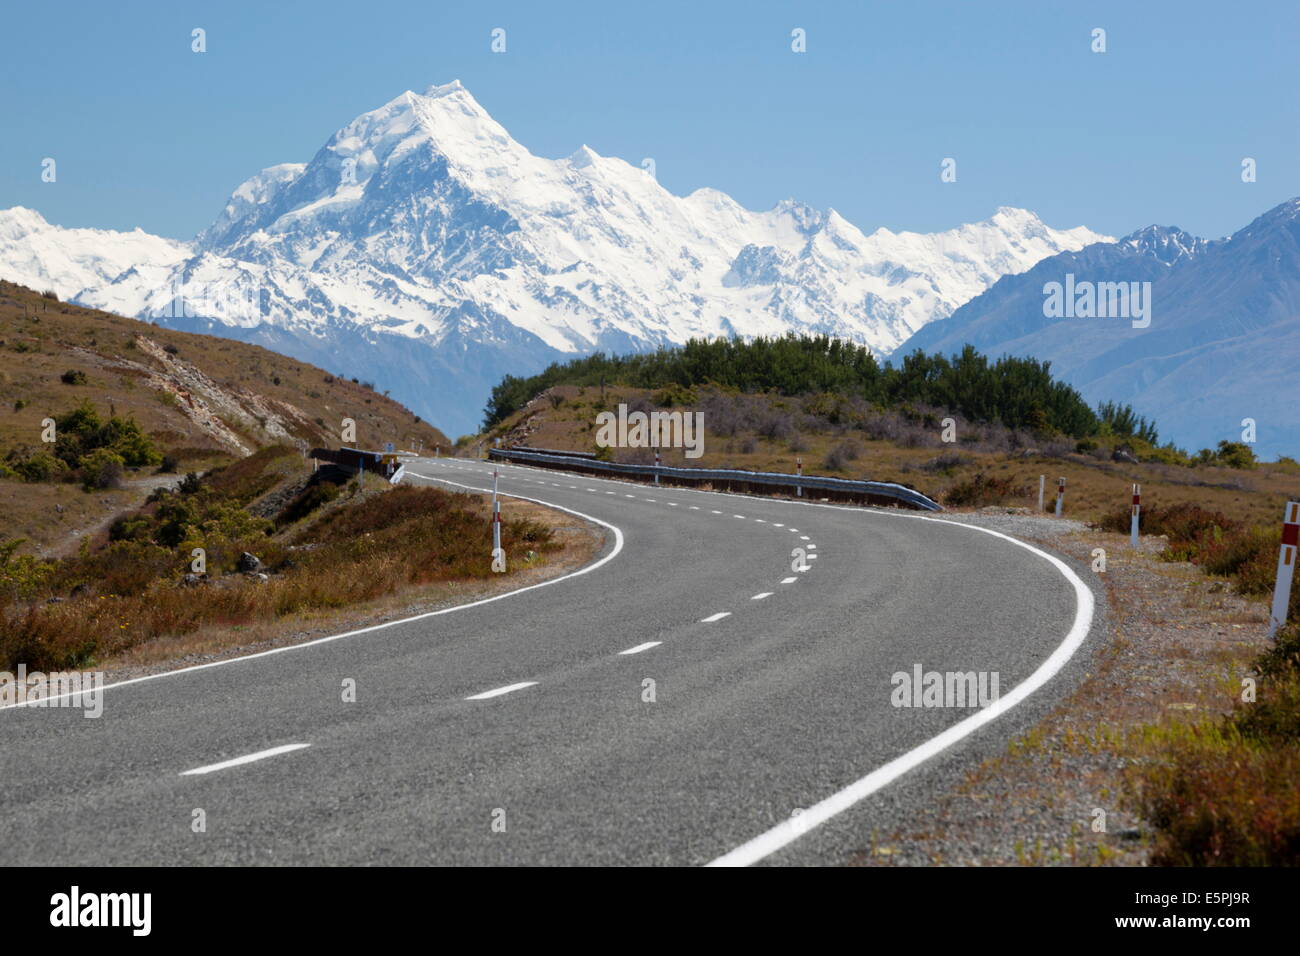 Mount Cook and Mount Cook Road with car, Mount Cook National Park, UNESCO Site, Canterbury region, South Island, New Zealand Stock Photo